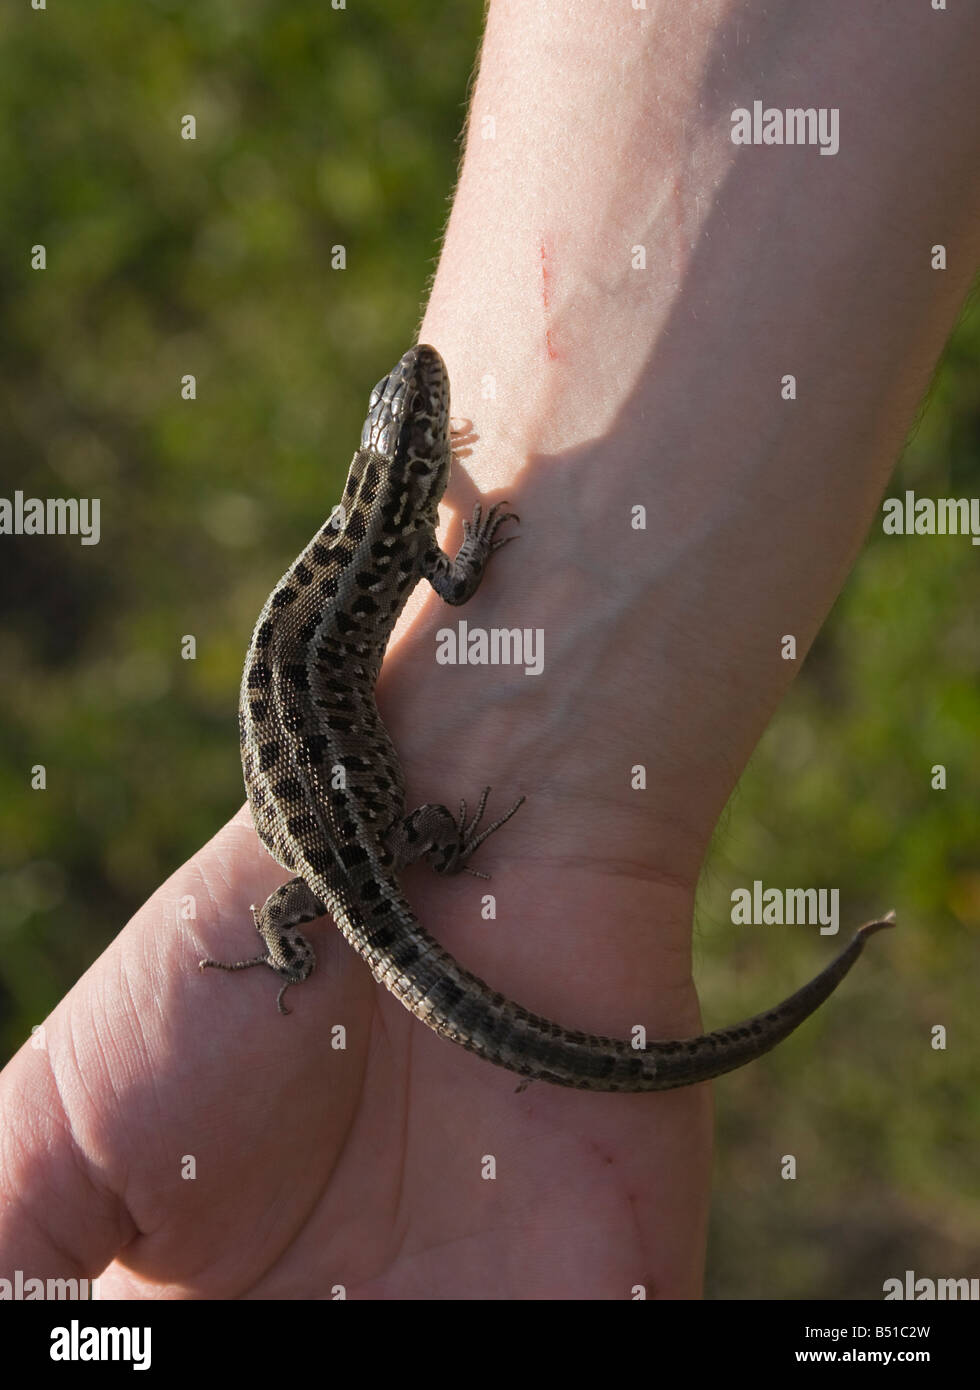 The Sand Lizard (Lacerta agilis) on a hand on grass background. Close-up Stock Photo